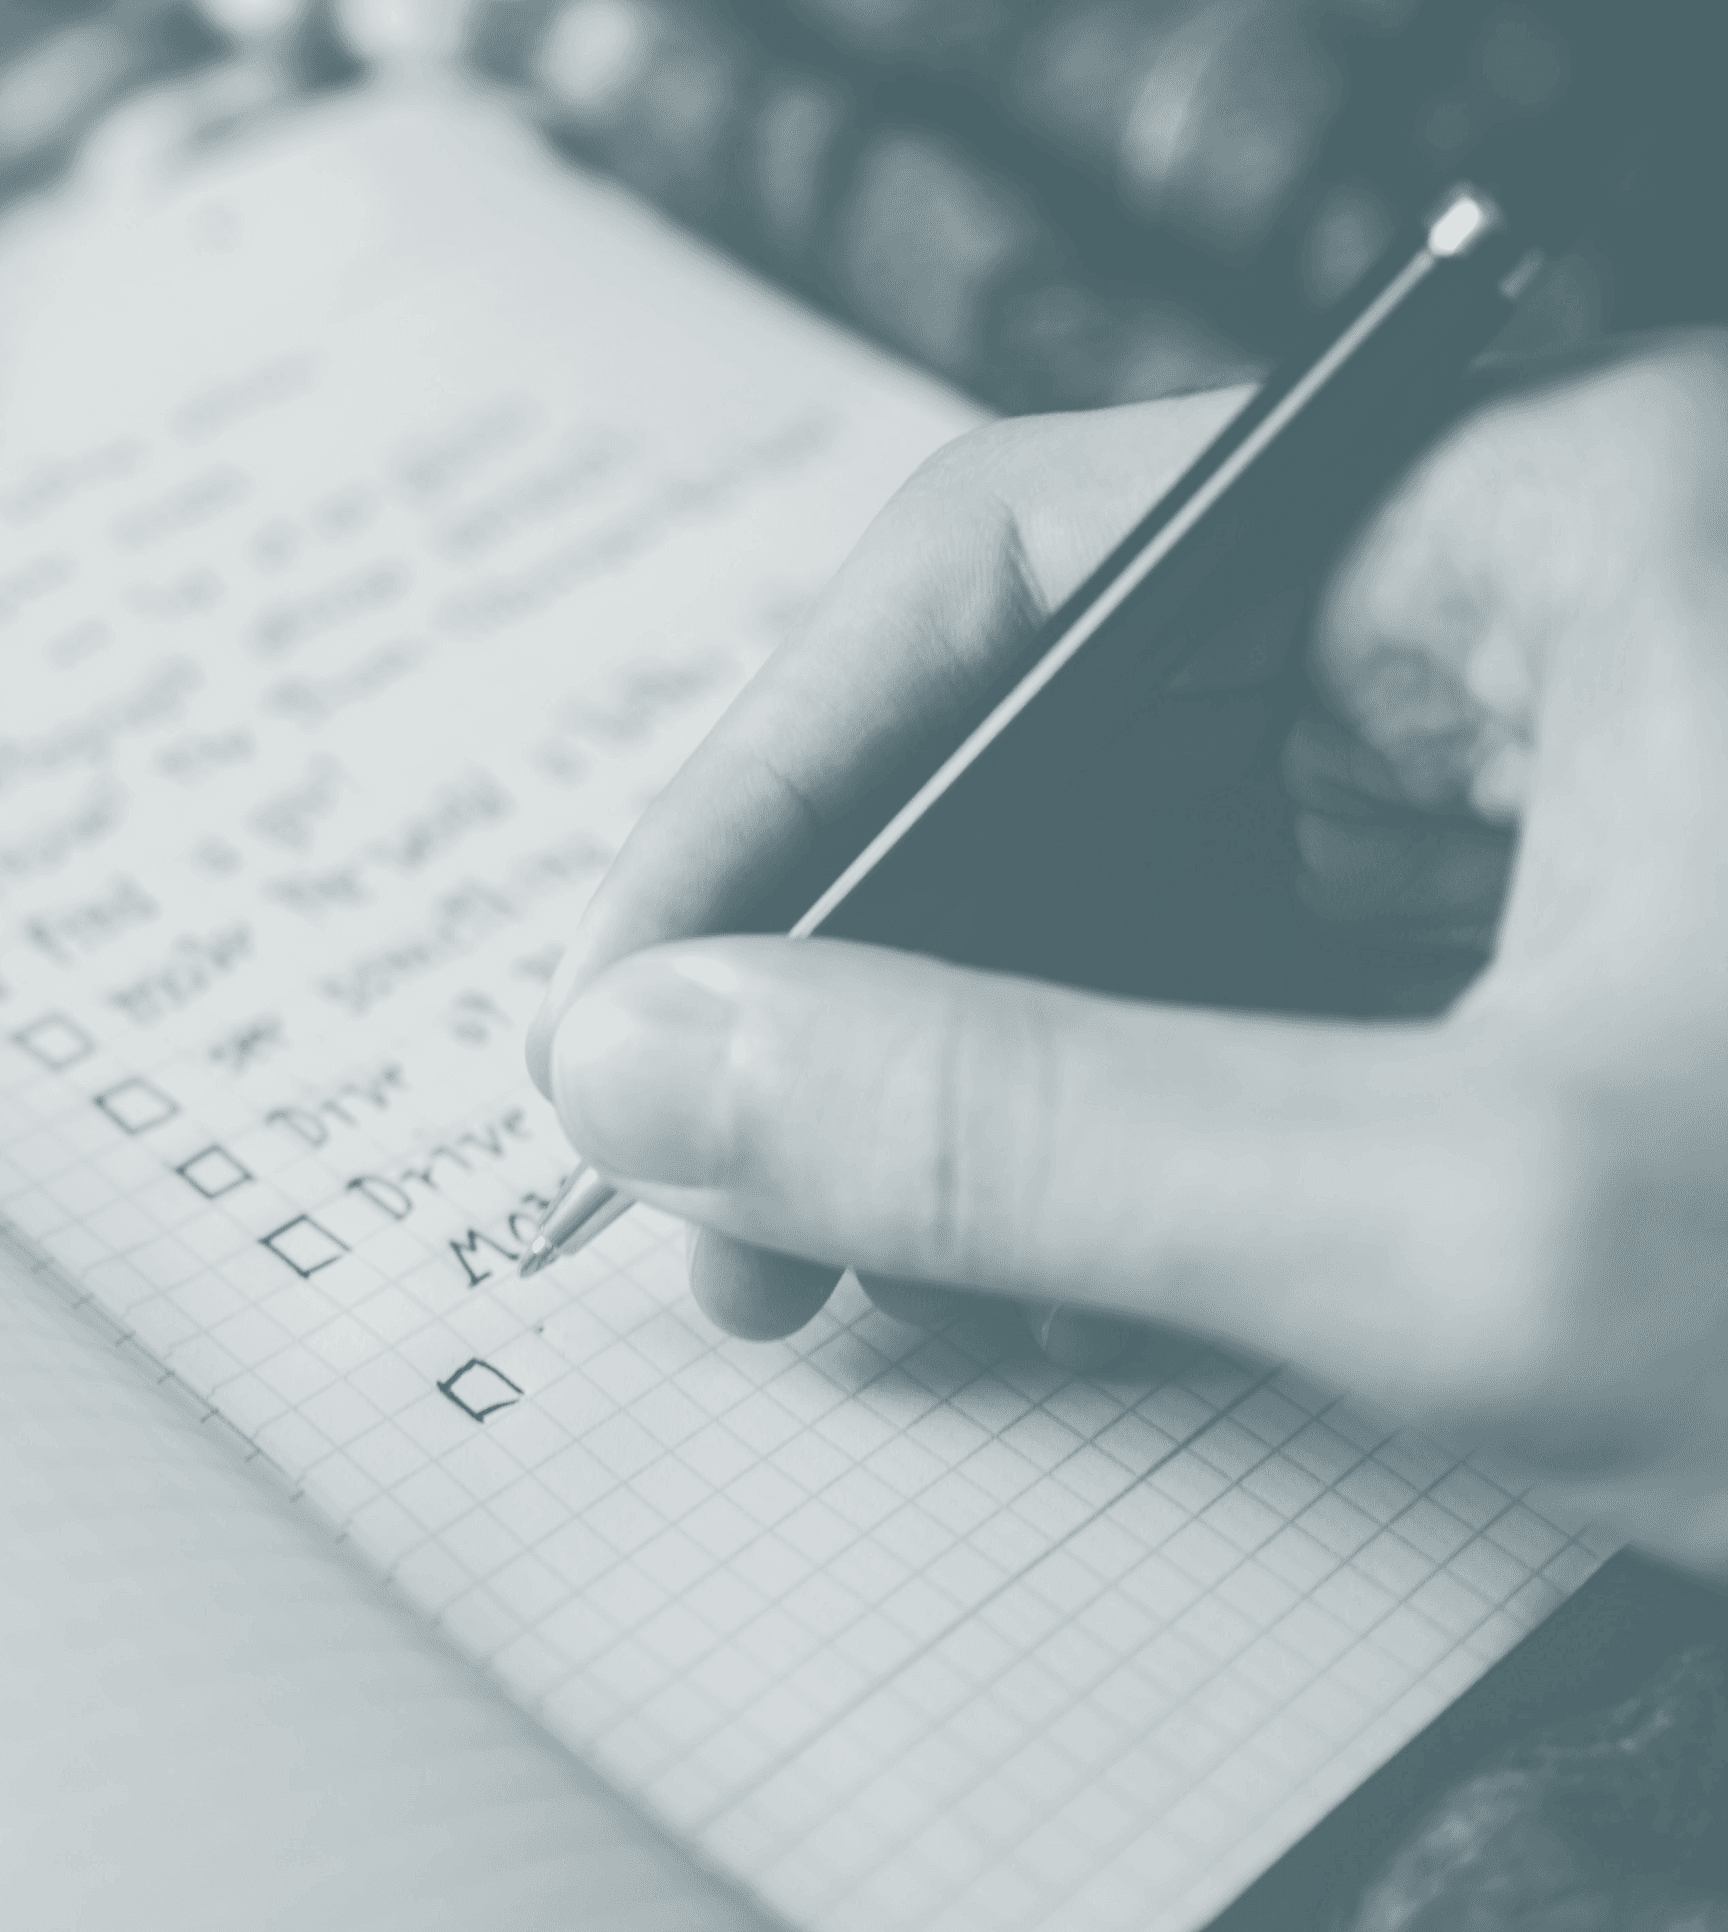 Person creating a check list in a notebook